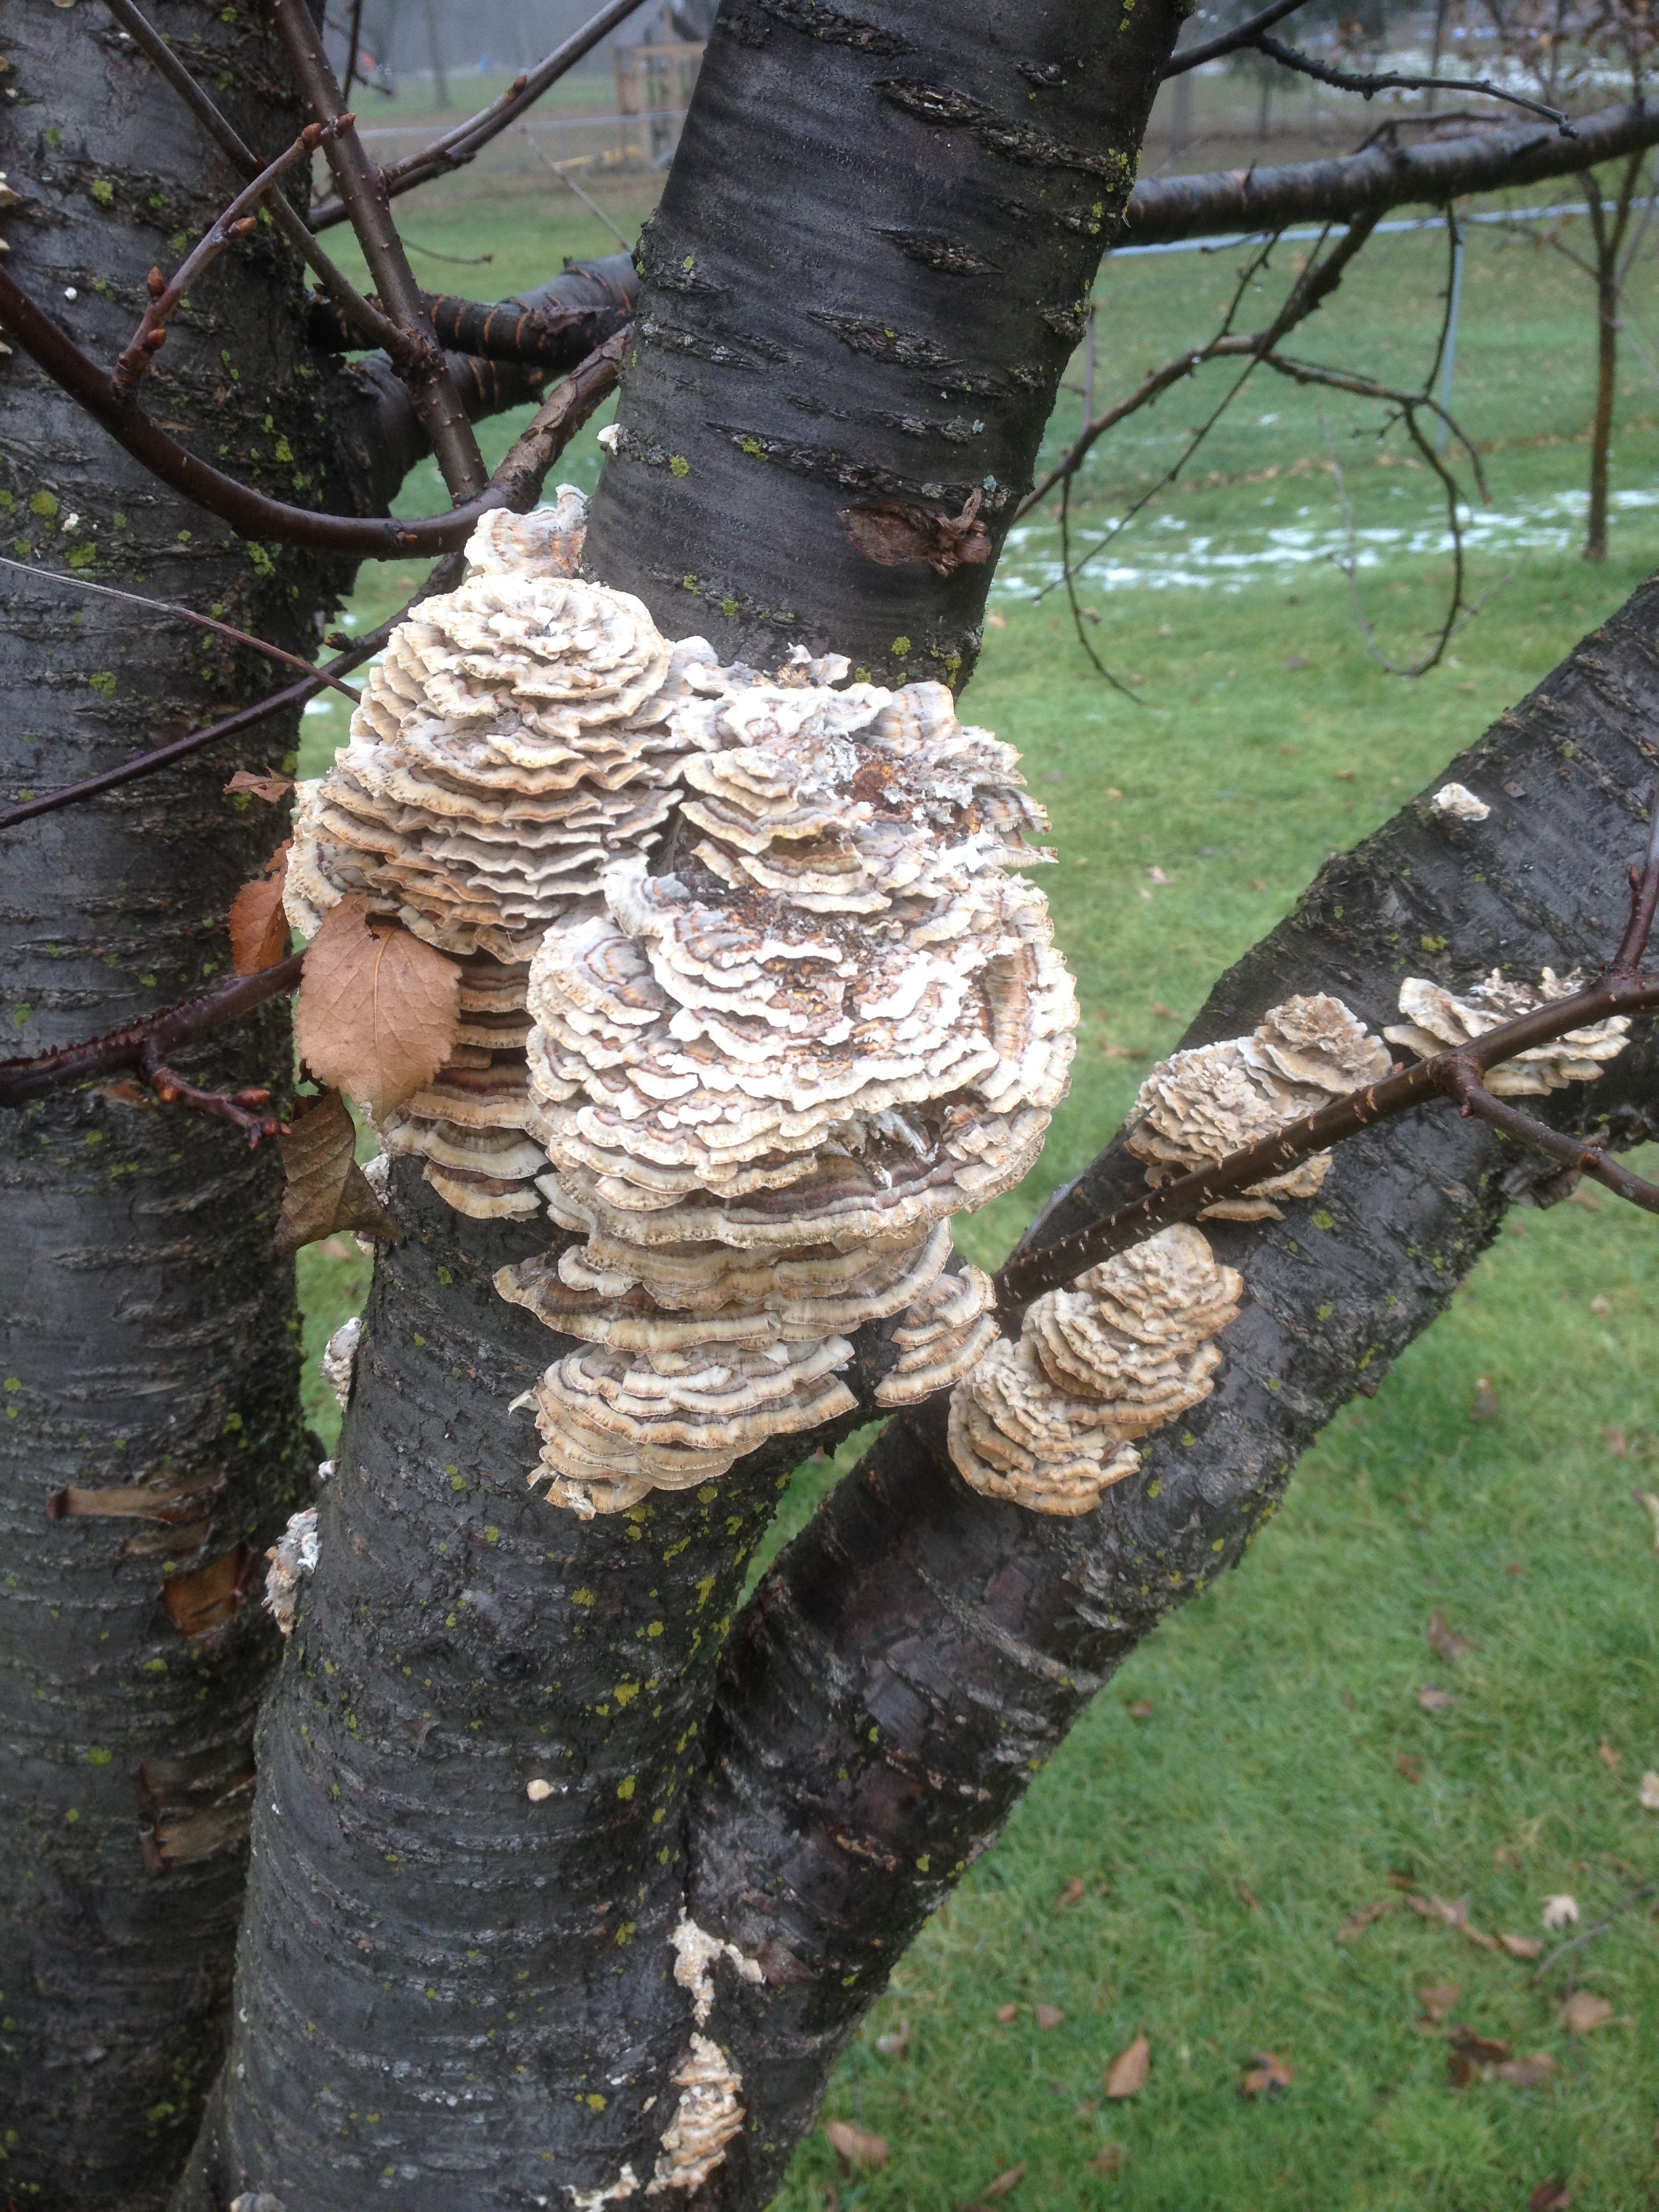 Mesabi cherry tree fungus or mold? - Ask an Expert